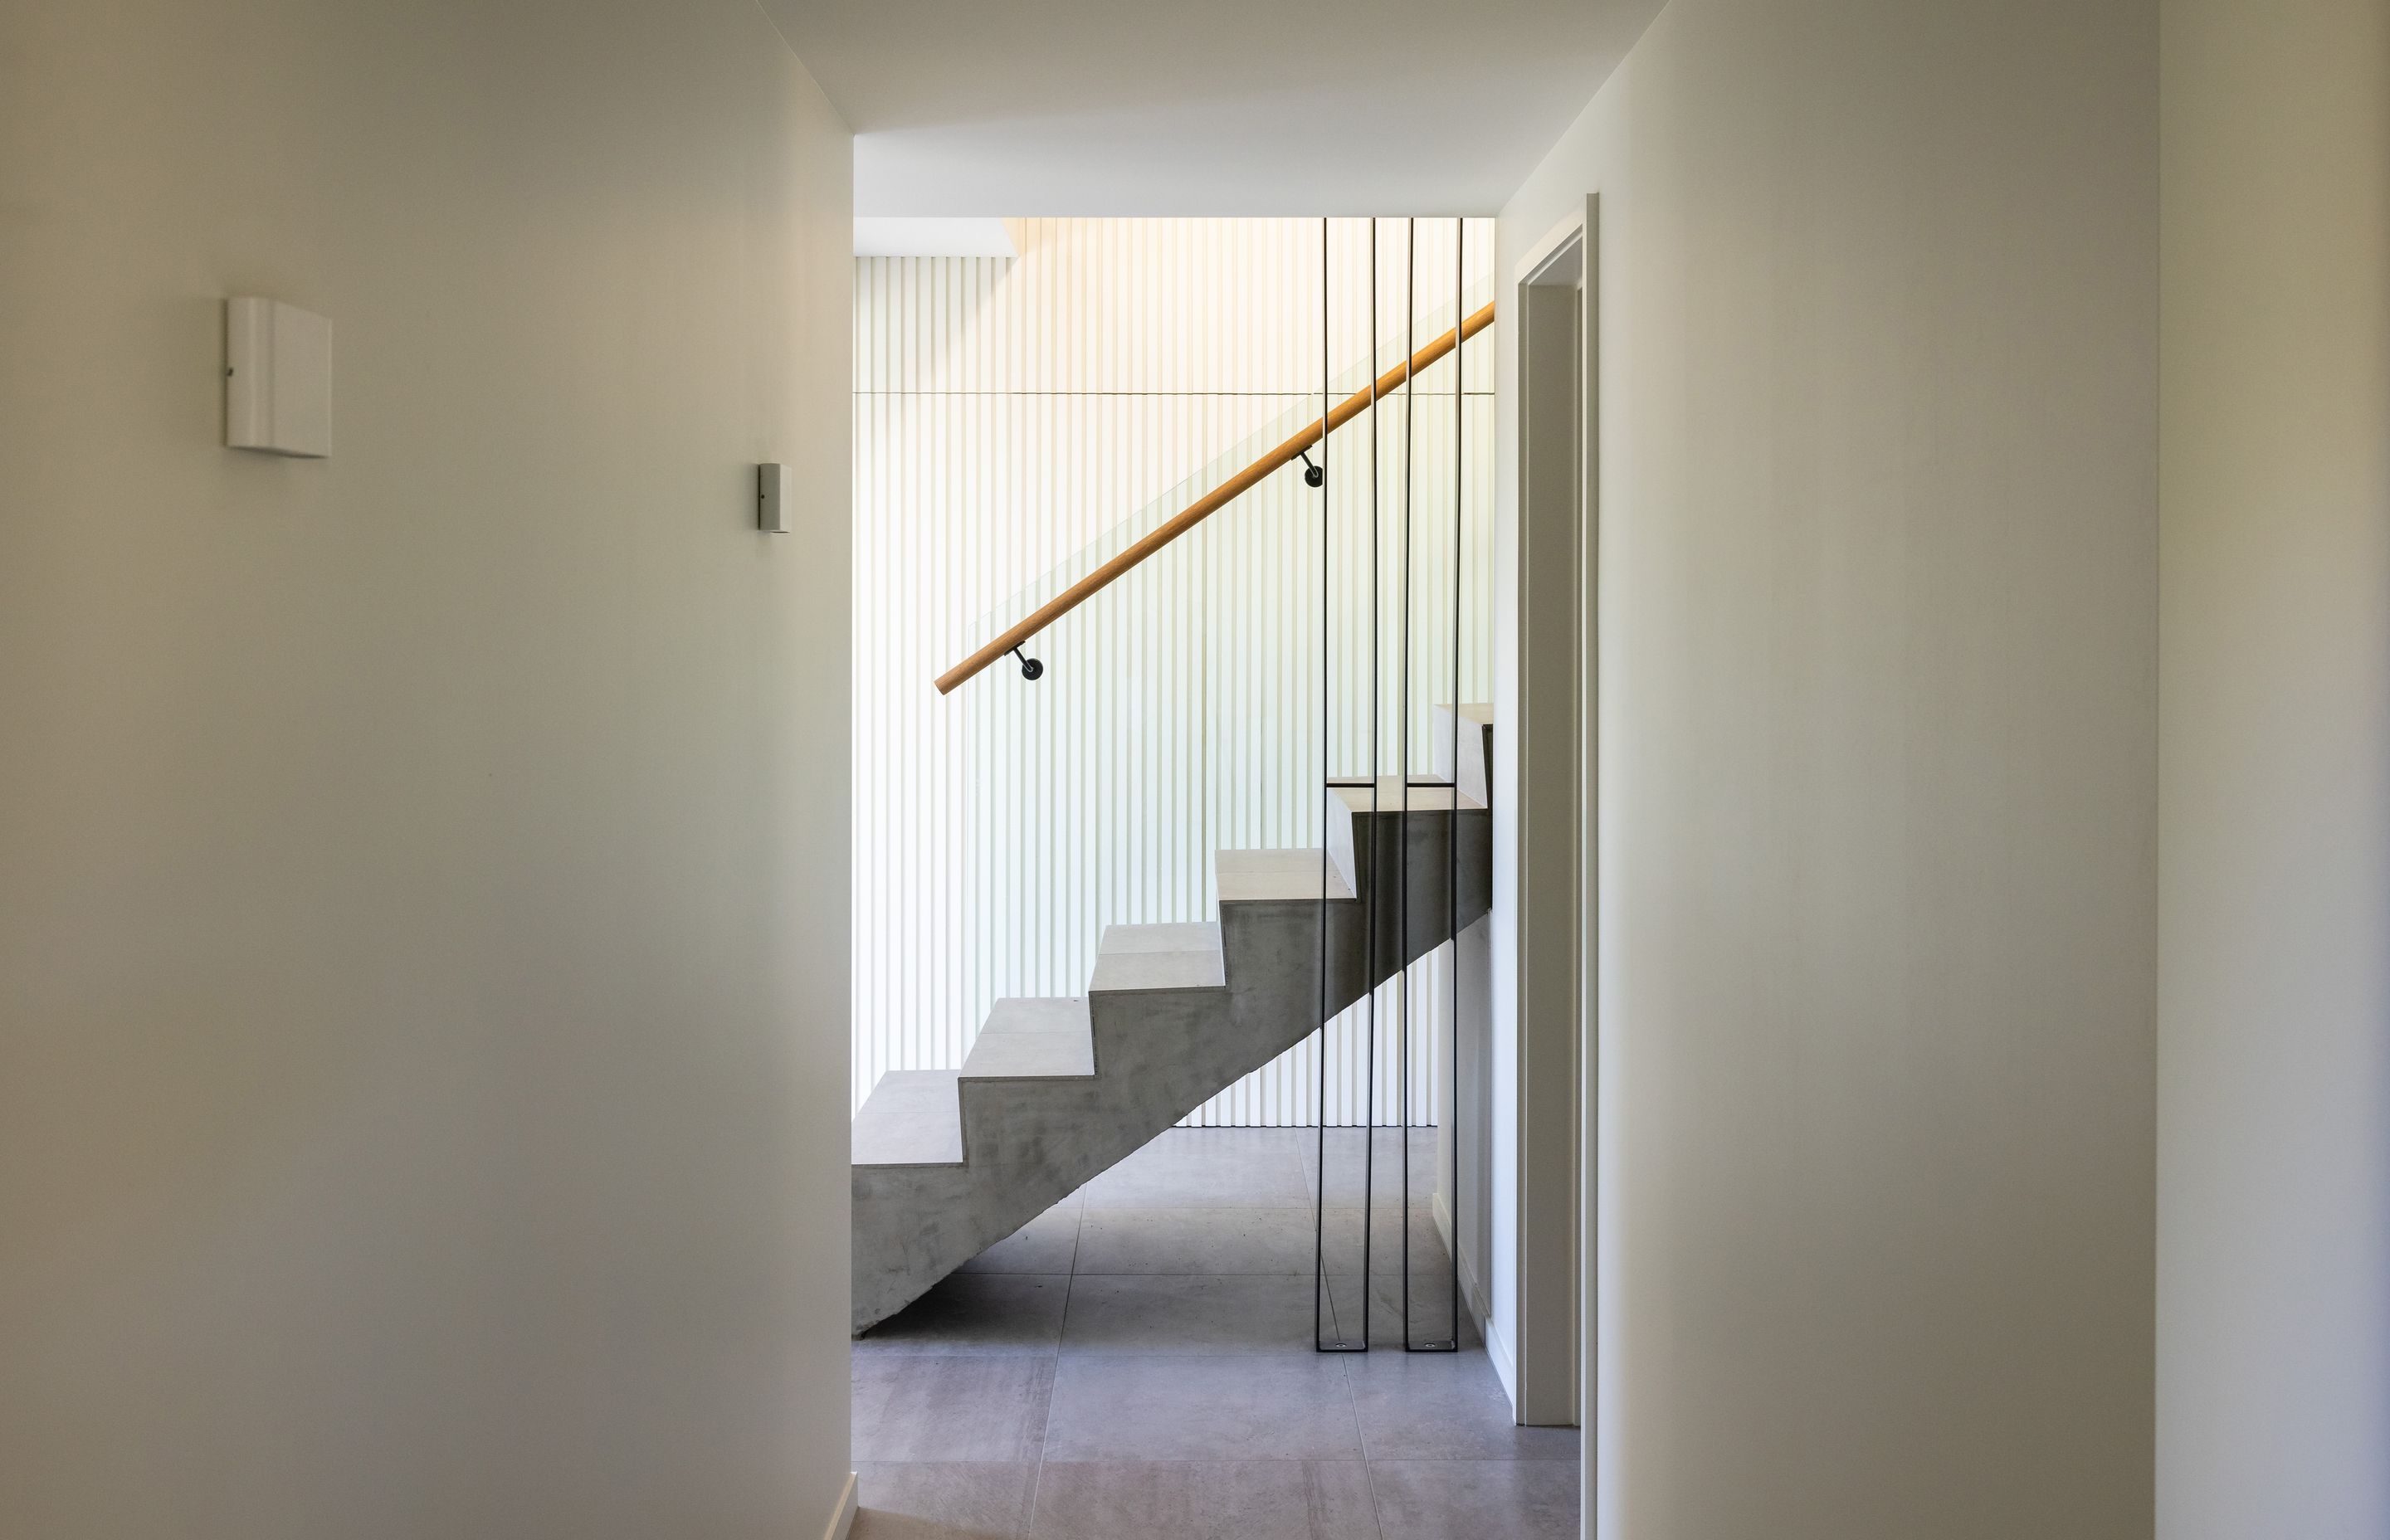 The stairs were designed to have a geometric and sculptural quality.